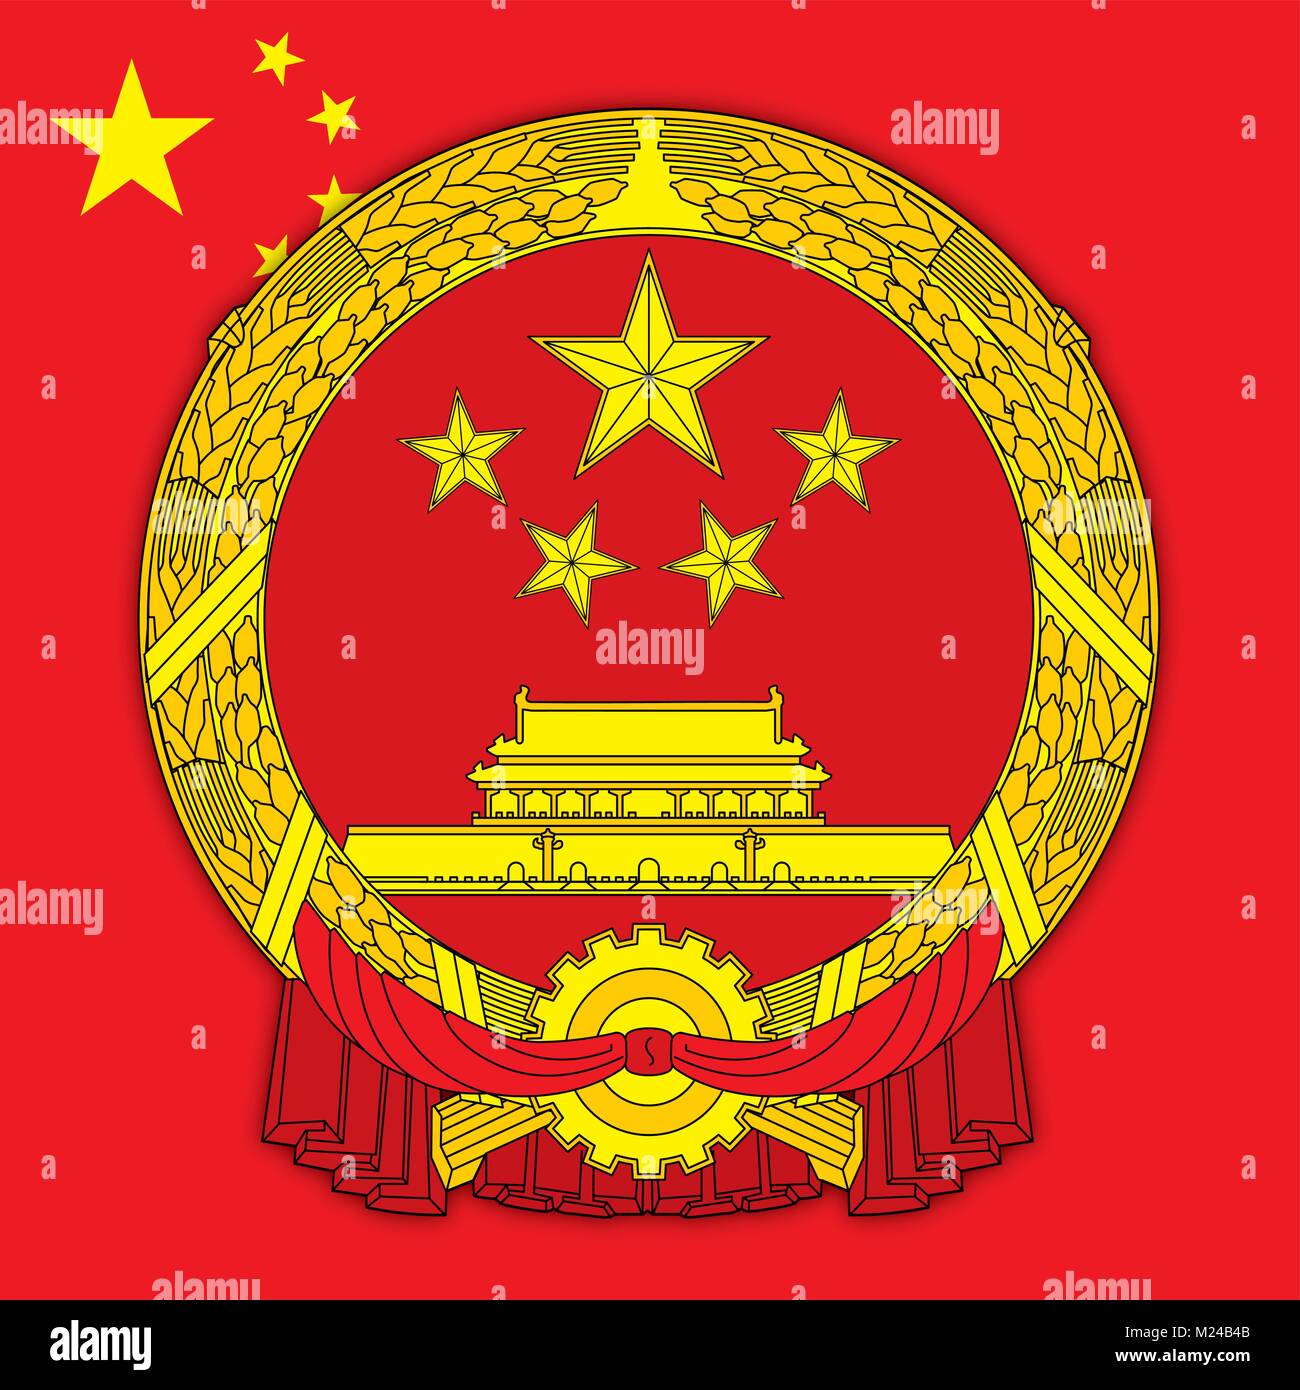 China coat of arms and flag, official symbols of the nation Stock Vector